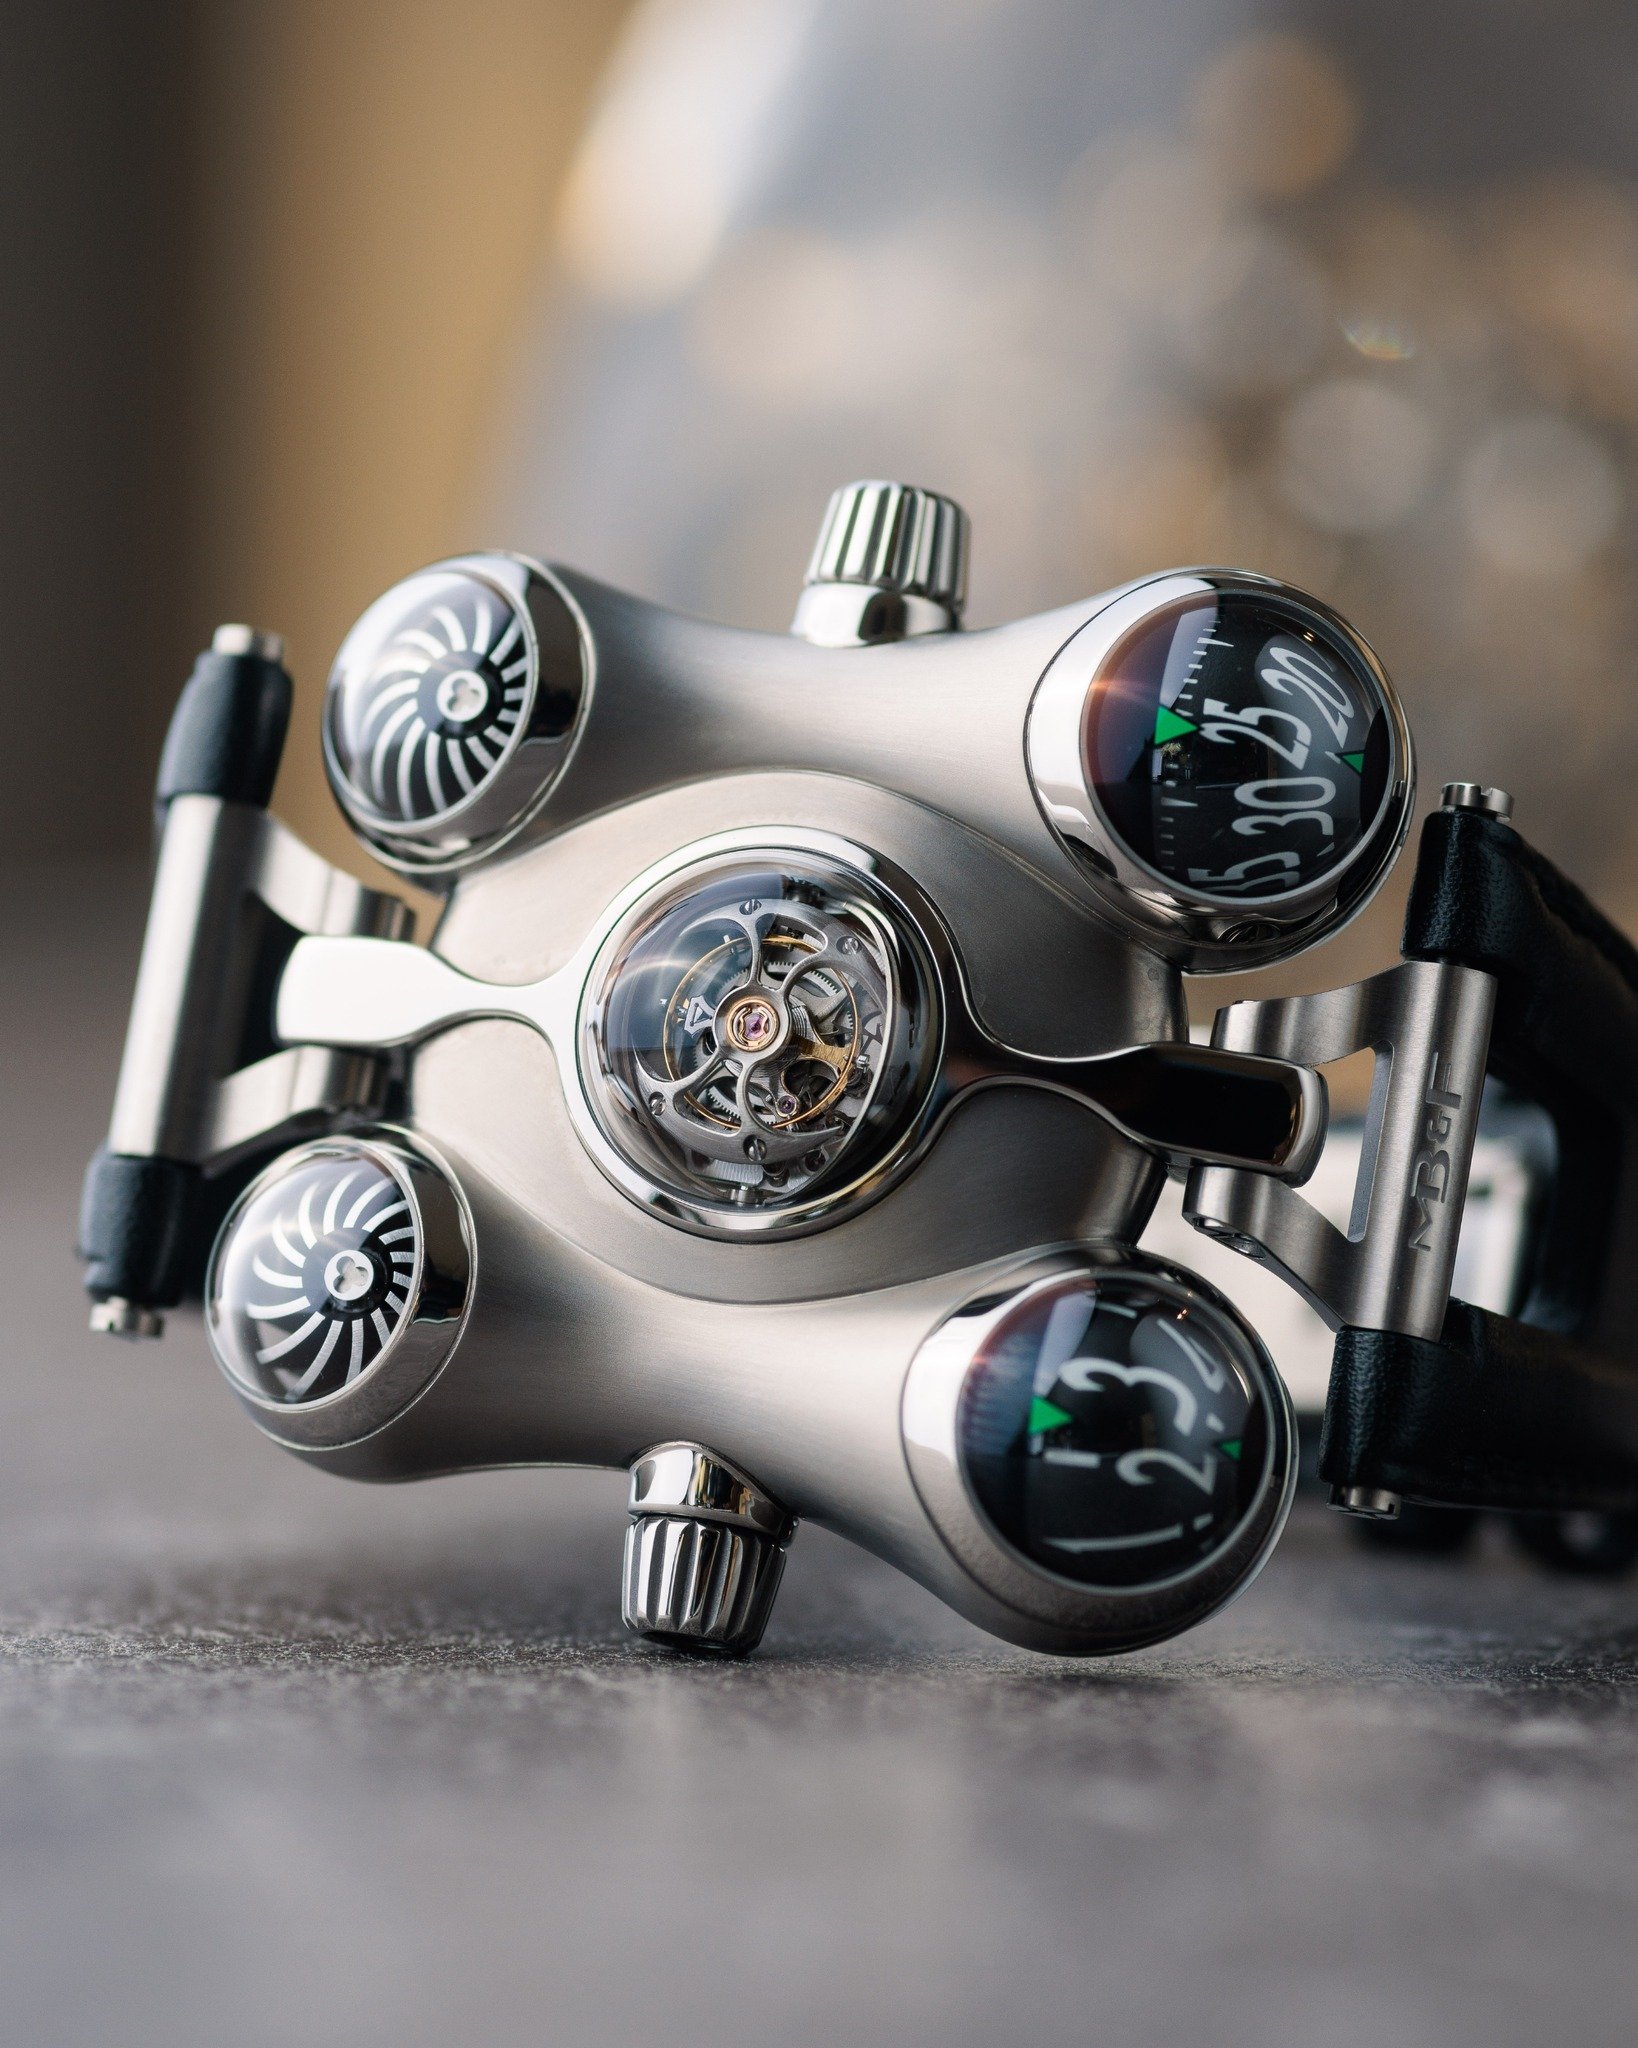 Presenting the MB&amp;F Horological Machine 6 &ldquo;Space Pirate&rdquo; in titanium. A pre-loved example now live on EsperLuxe! 

Coined the &ldquo;Space Pirate&rdquo; for good reason, this is a timepiece that feels more like a miniature spaceship t